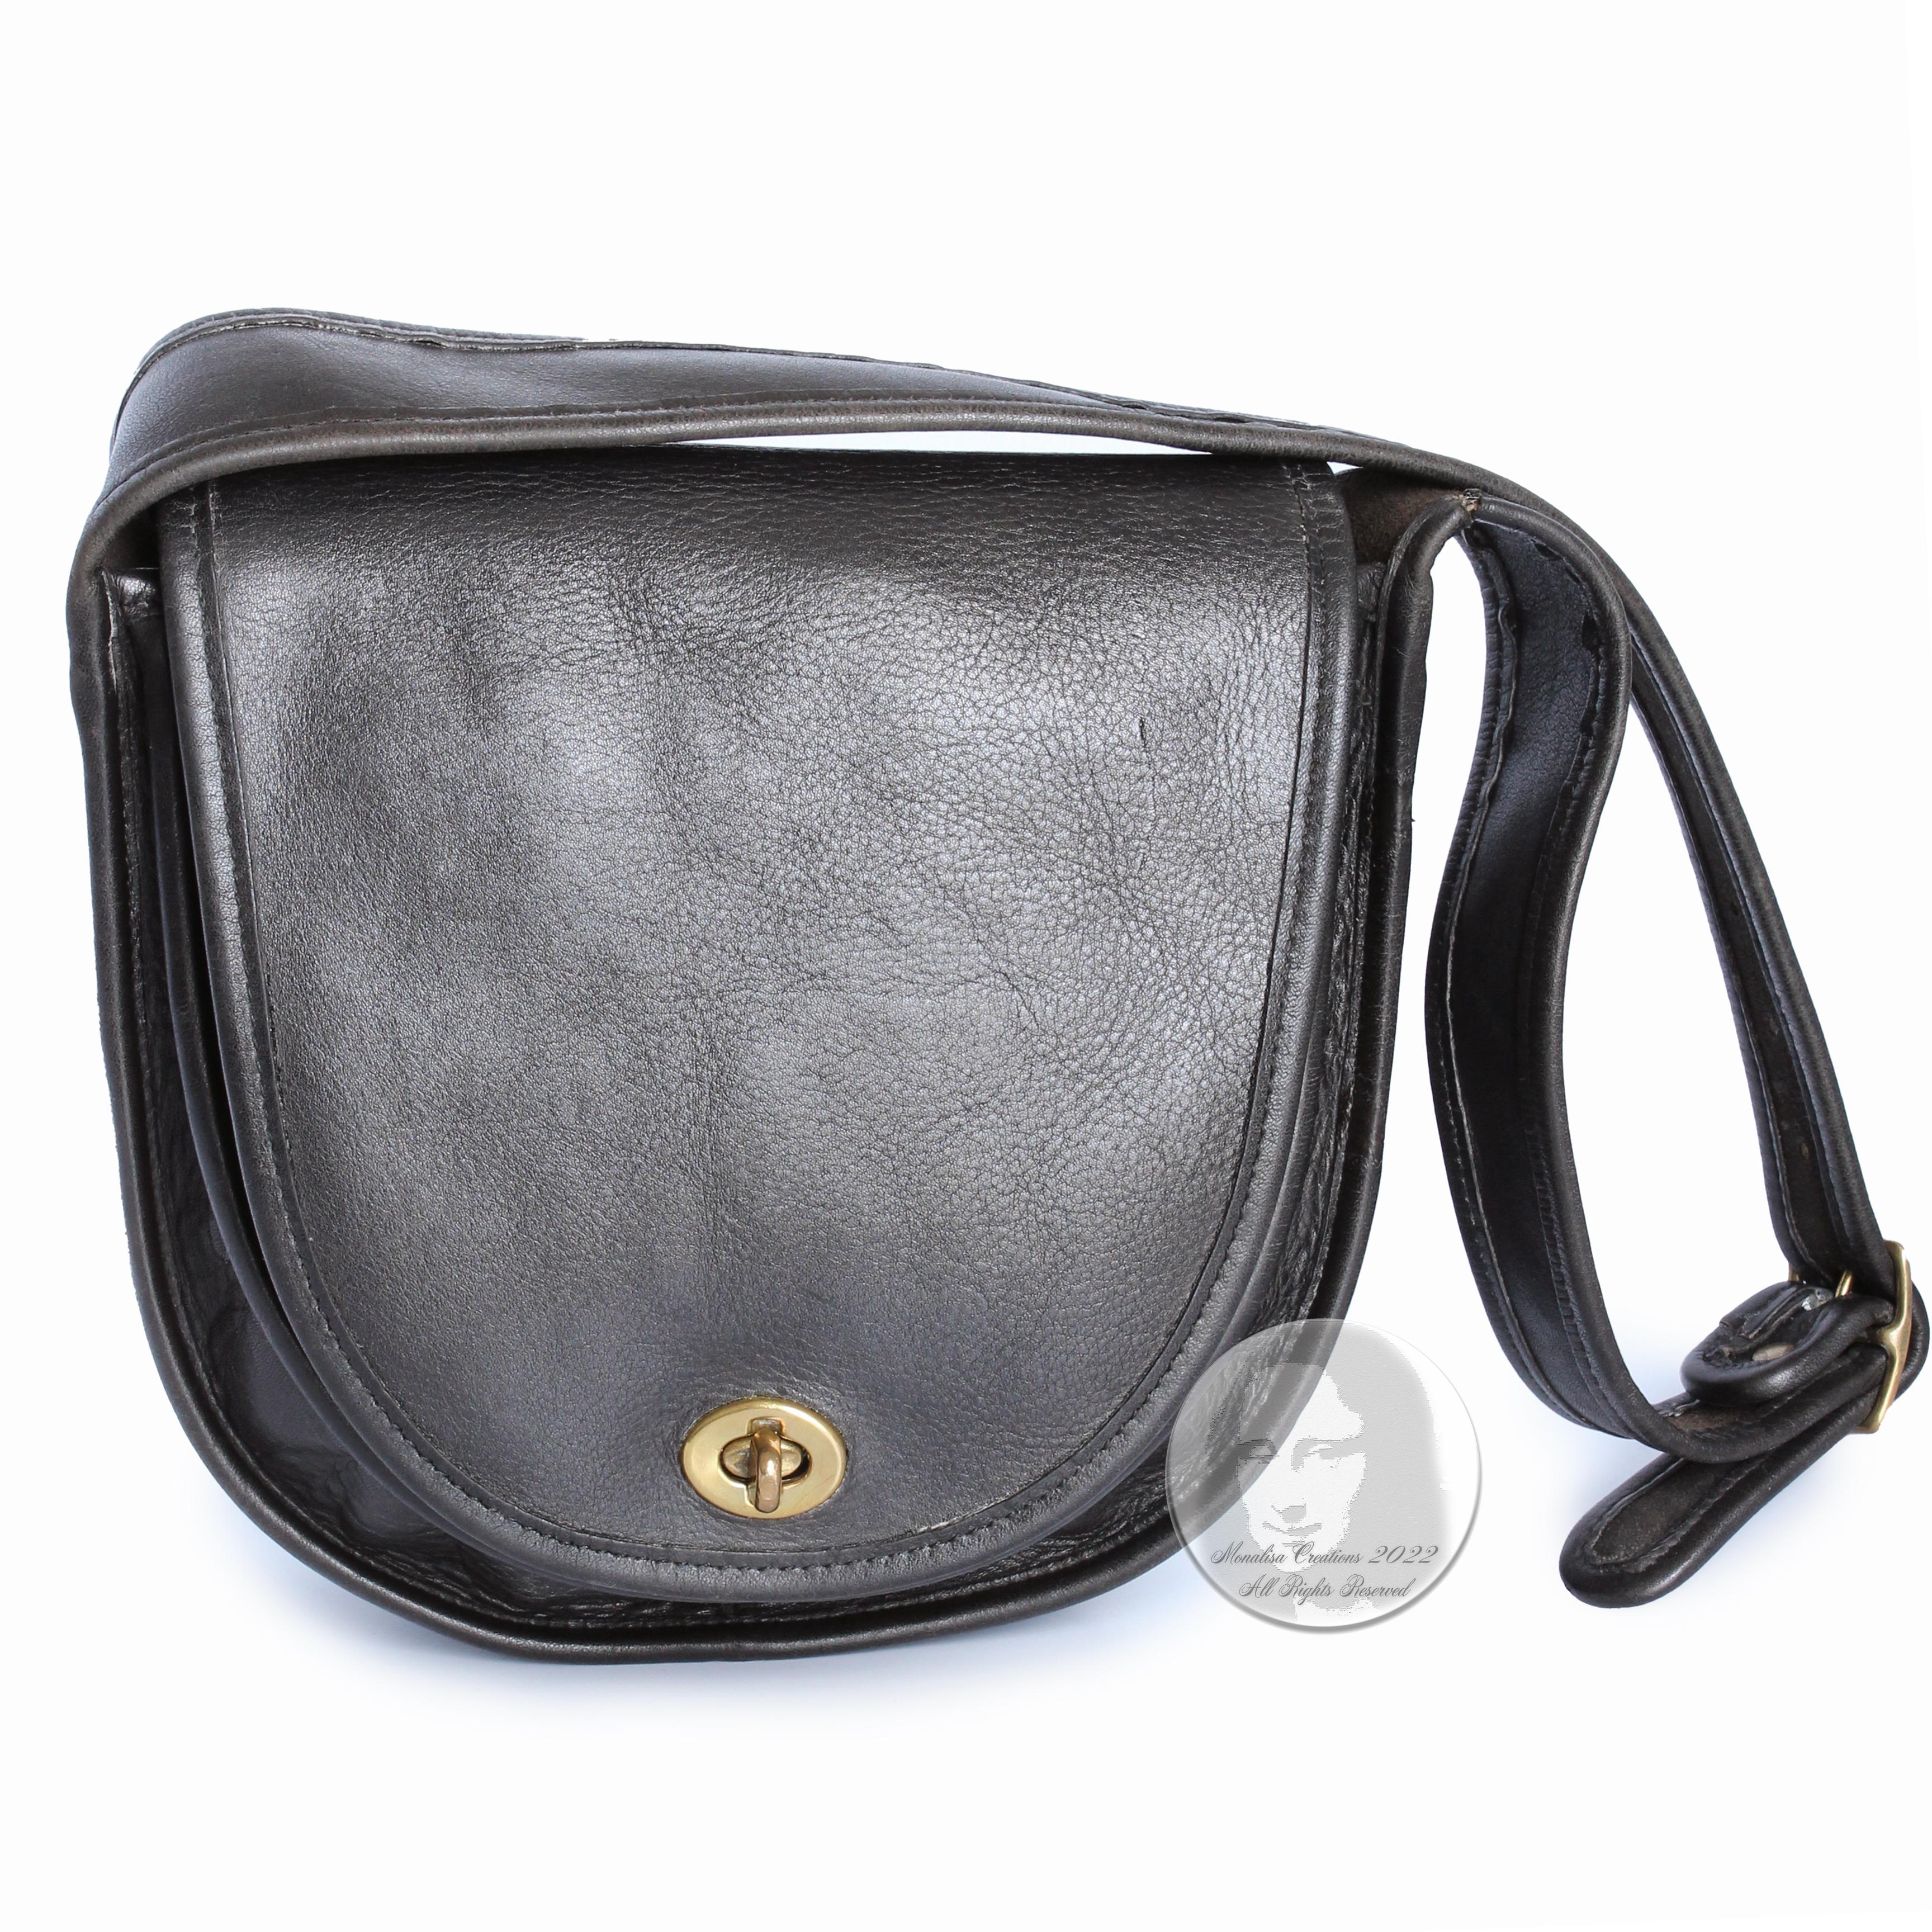 Authentic, preowned, early 70s Coach Cashin Era 'Kangaroo' Shoulder Bag Pouch with wide shoulder strap, likely made in the early 70s.  Made from black leather, it's unlined with a 'kangaroo' pocket under the flap and one interior pocket.  A chic